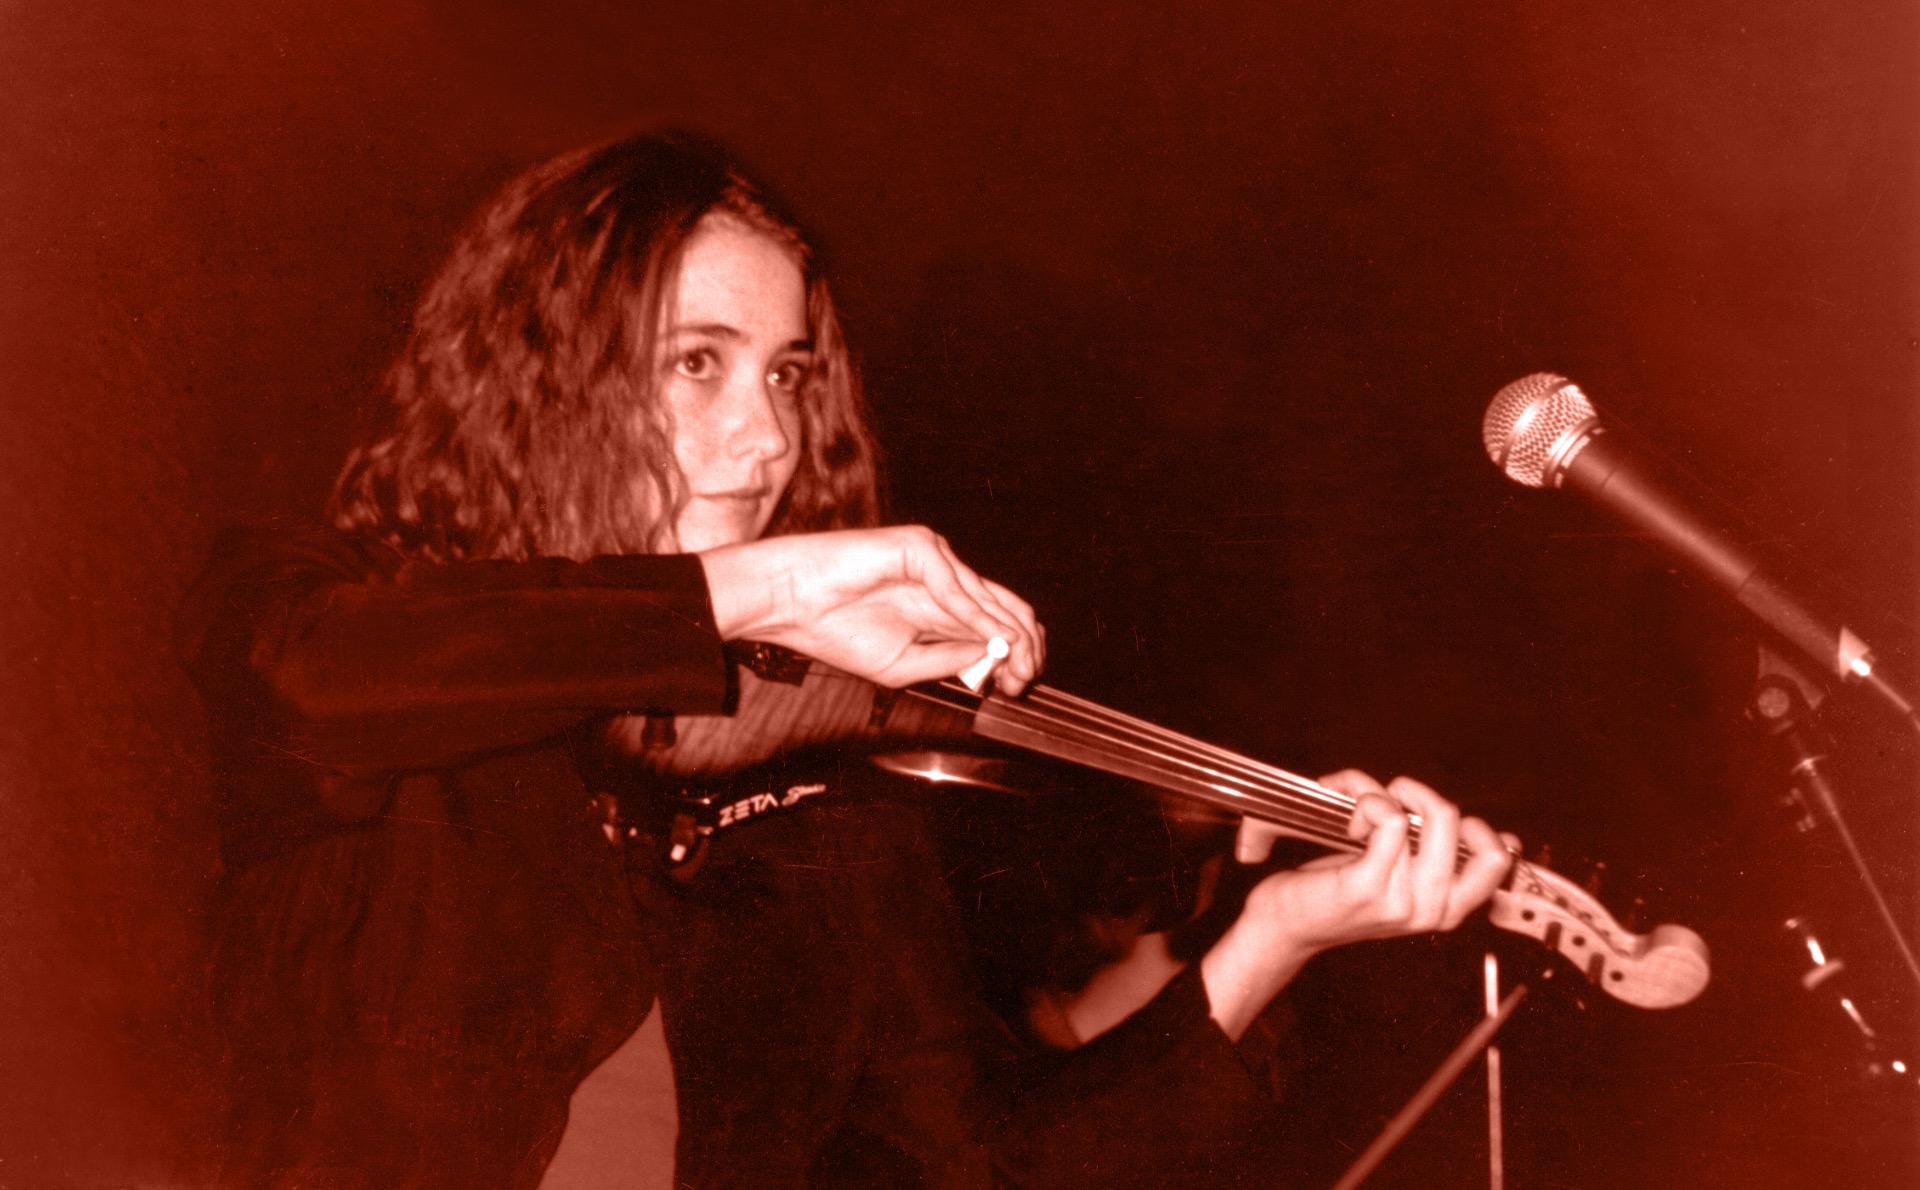 Rhiannon playing electric violin in a music college blues band at the Civic Bar in Nelson BC, 1997